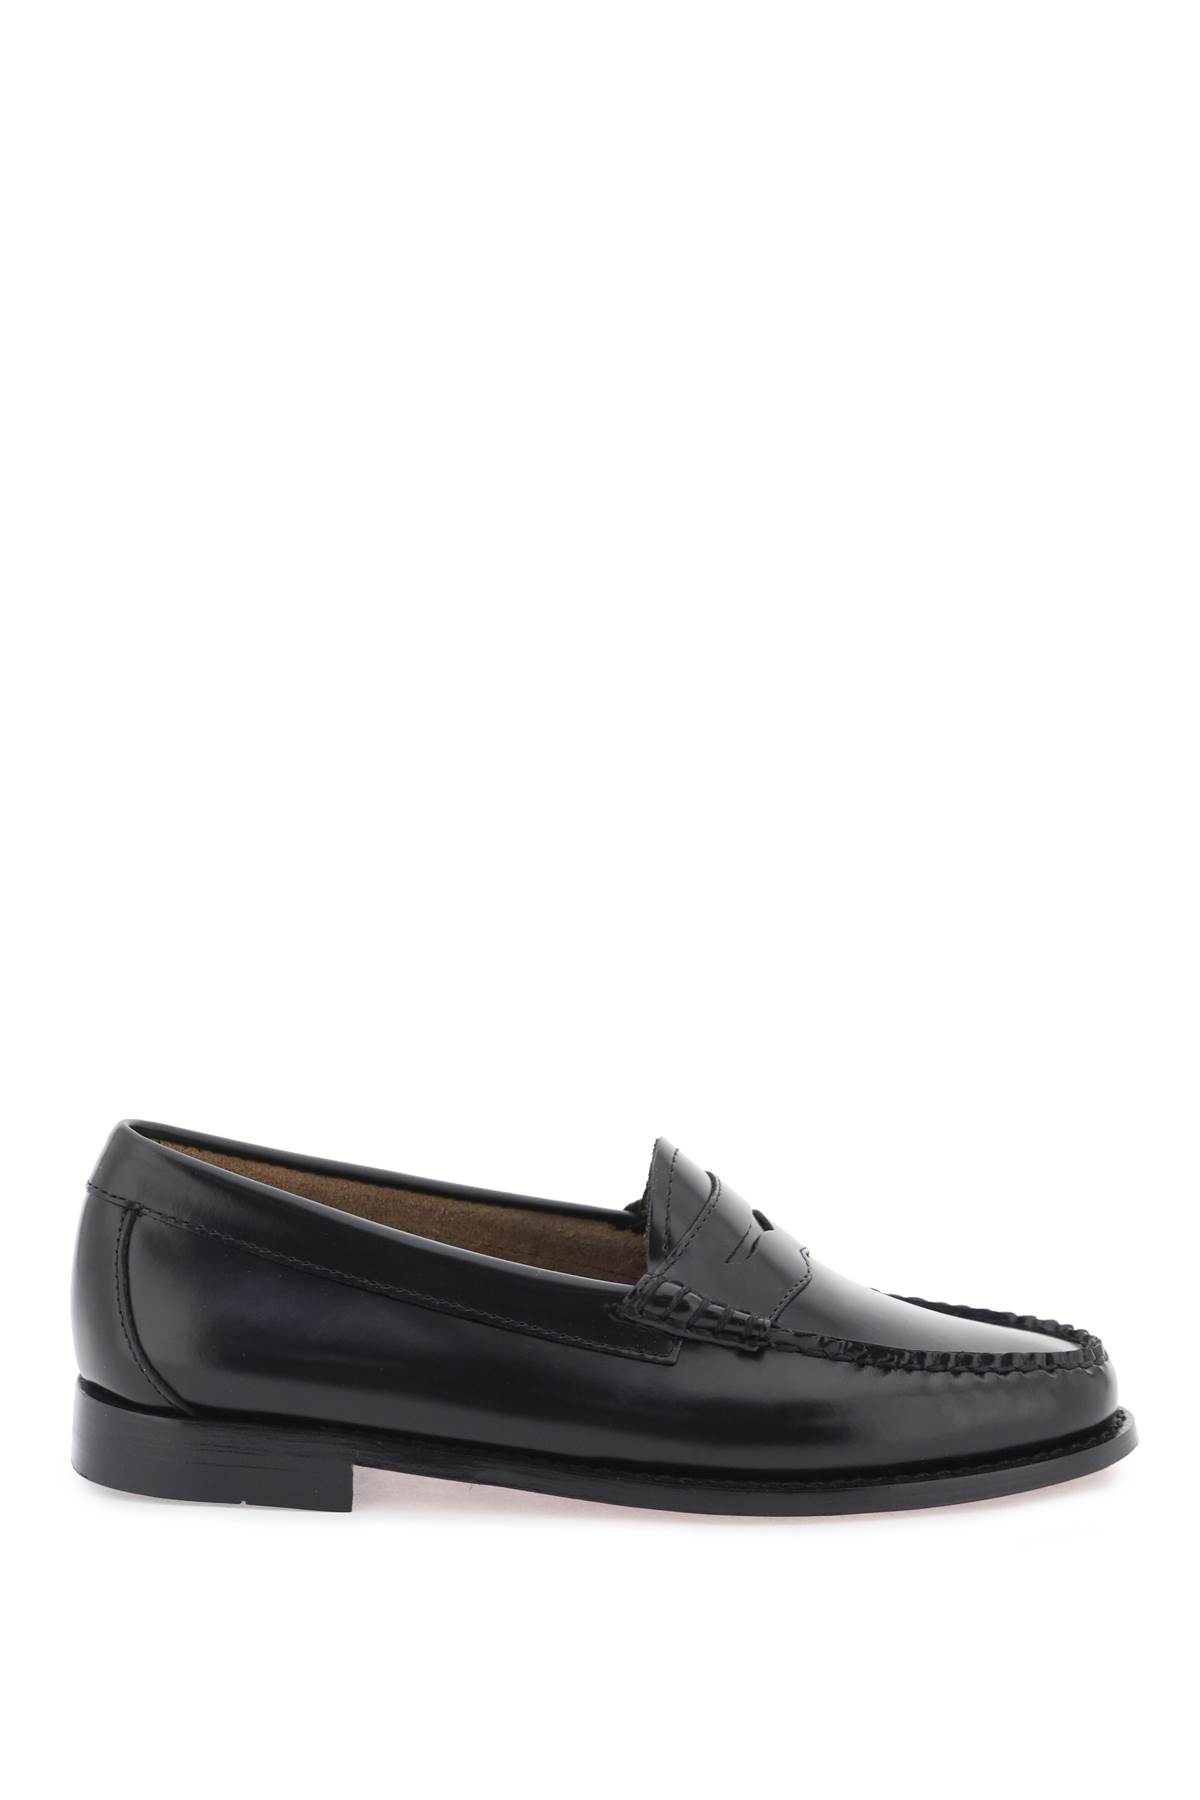 G.H.Bass & Co. Weejuns Penny Loafers